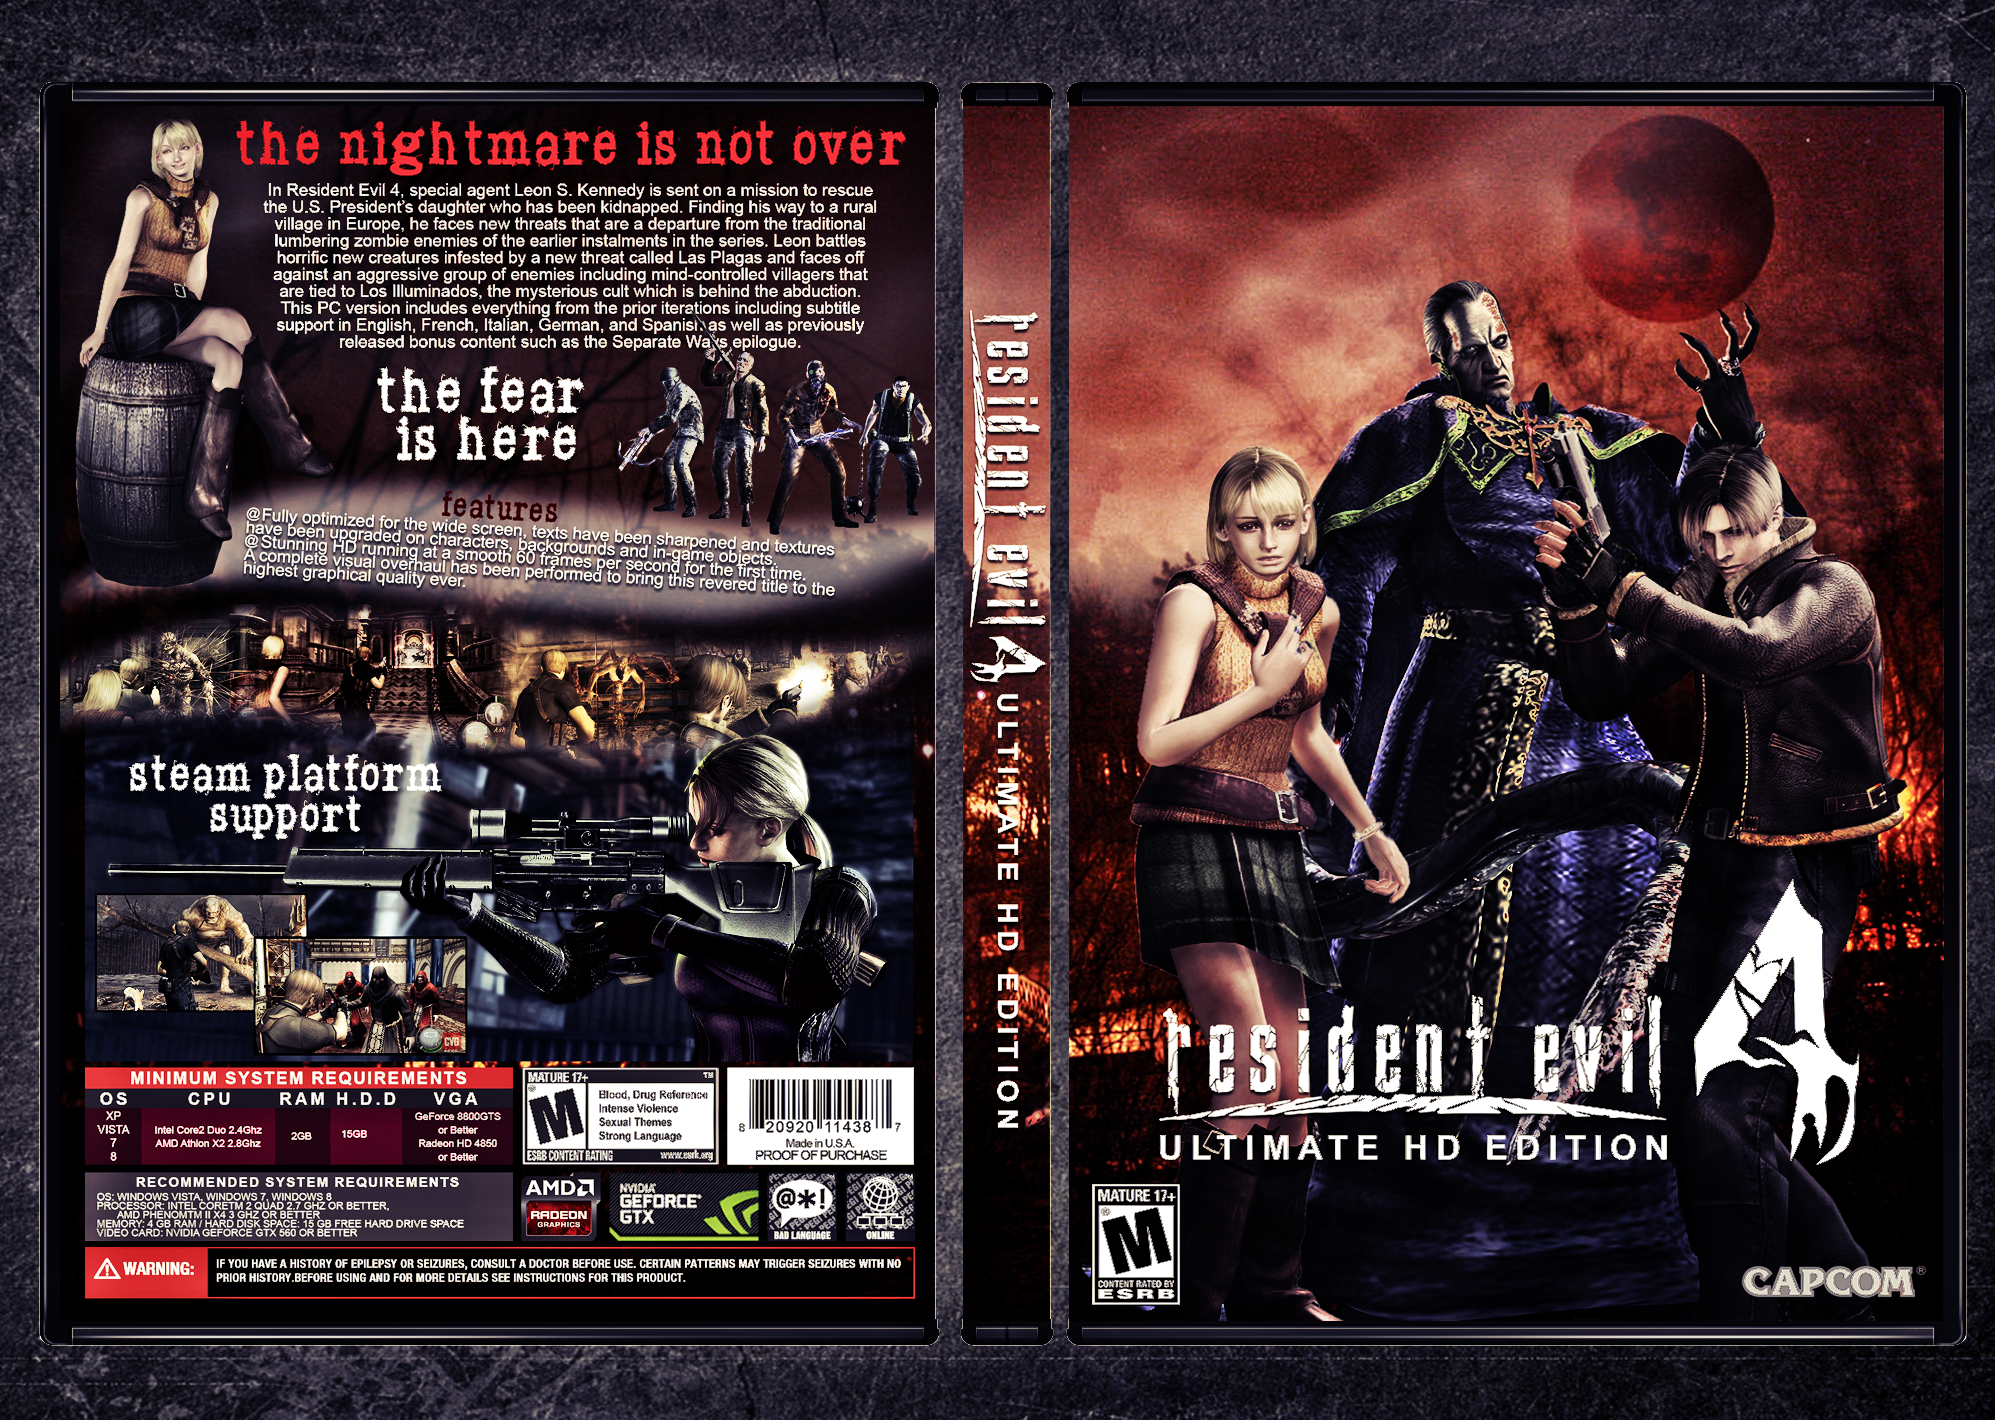 Resident Evil 4 Ultimate HD Edition box cover